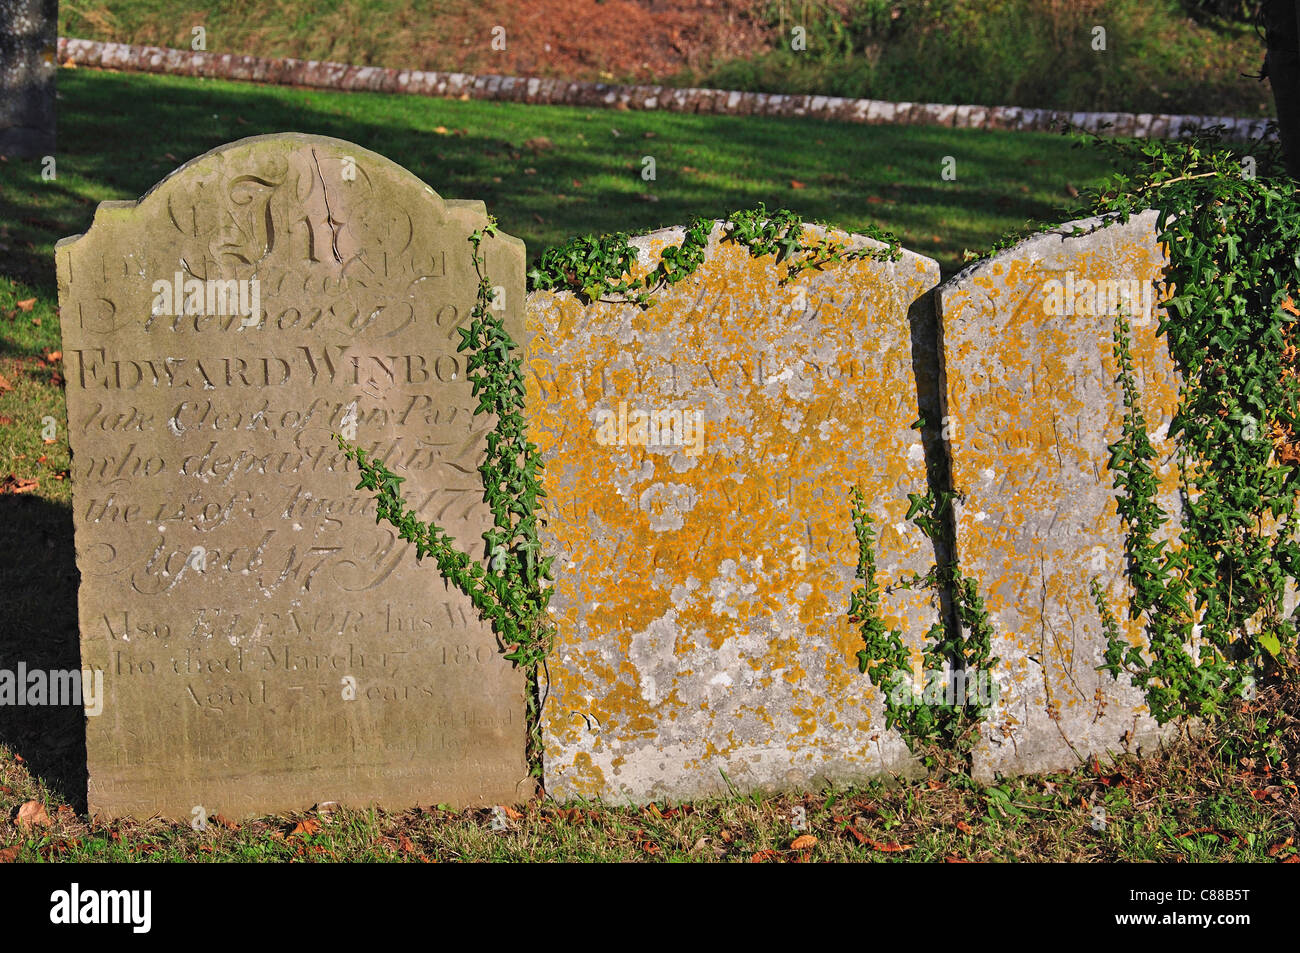 Ancient headstones in churchyard of The Parish Church of St.Mary's, Church Gate, Thatcham, Berkshire, England, United Kingdom Stock Photo